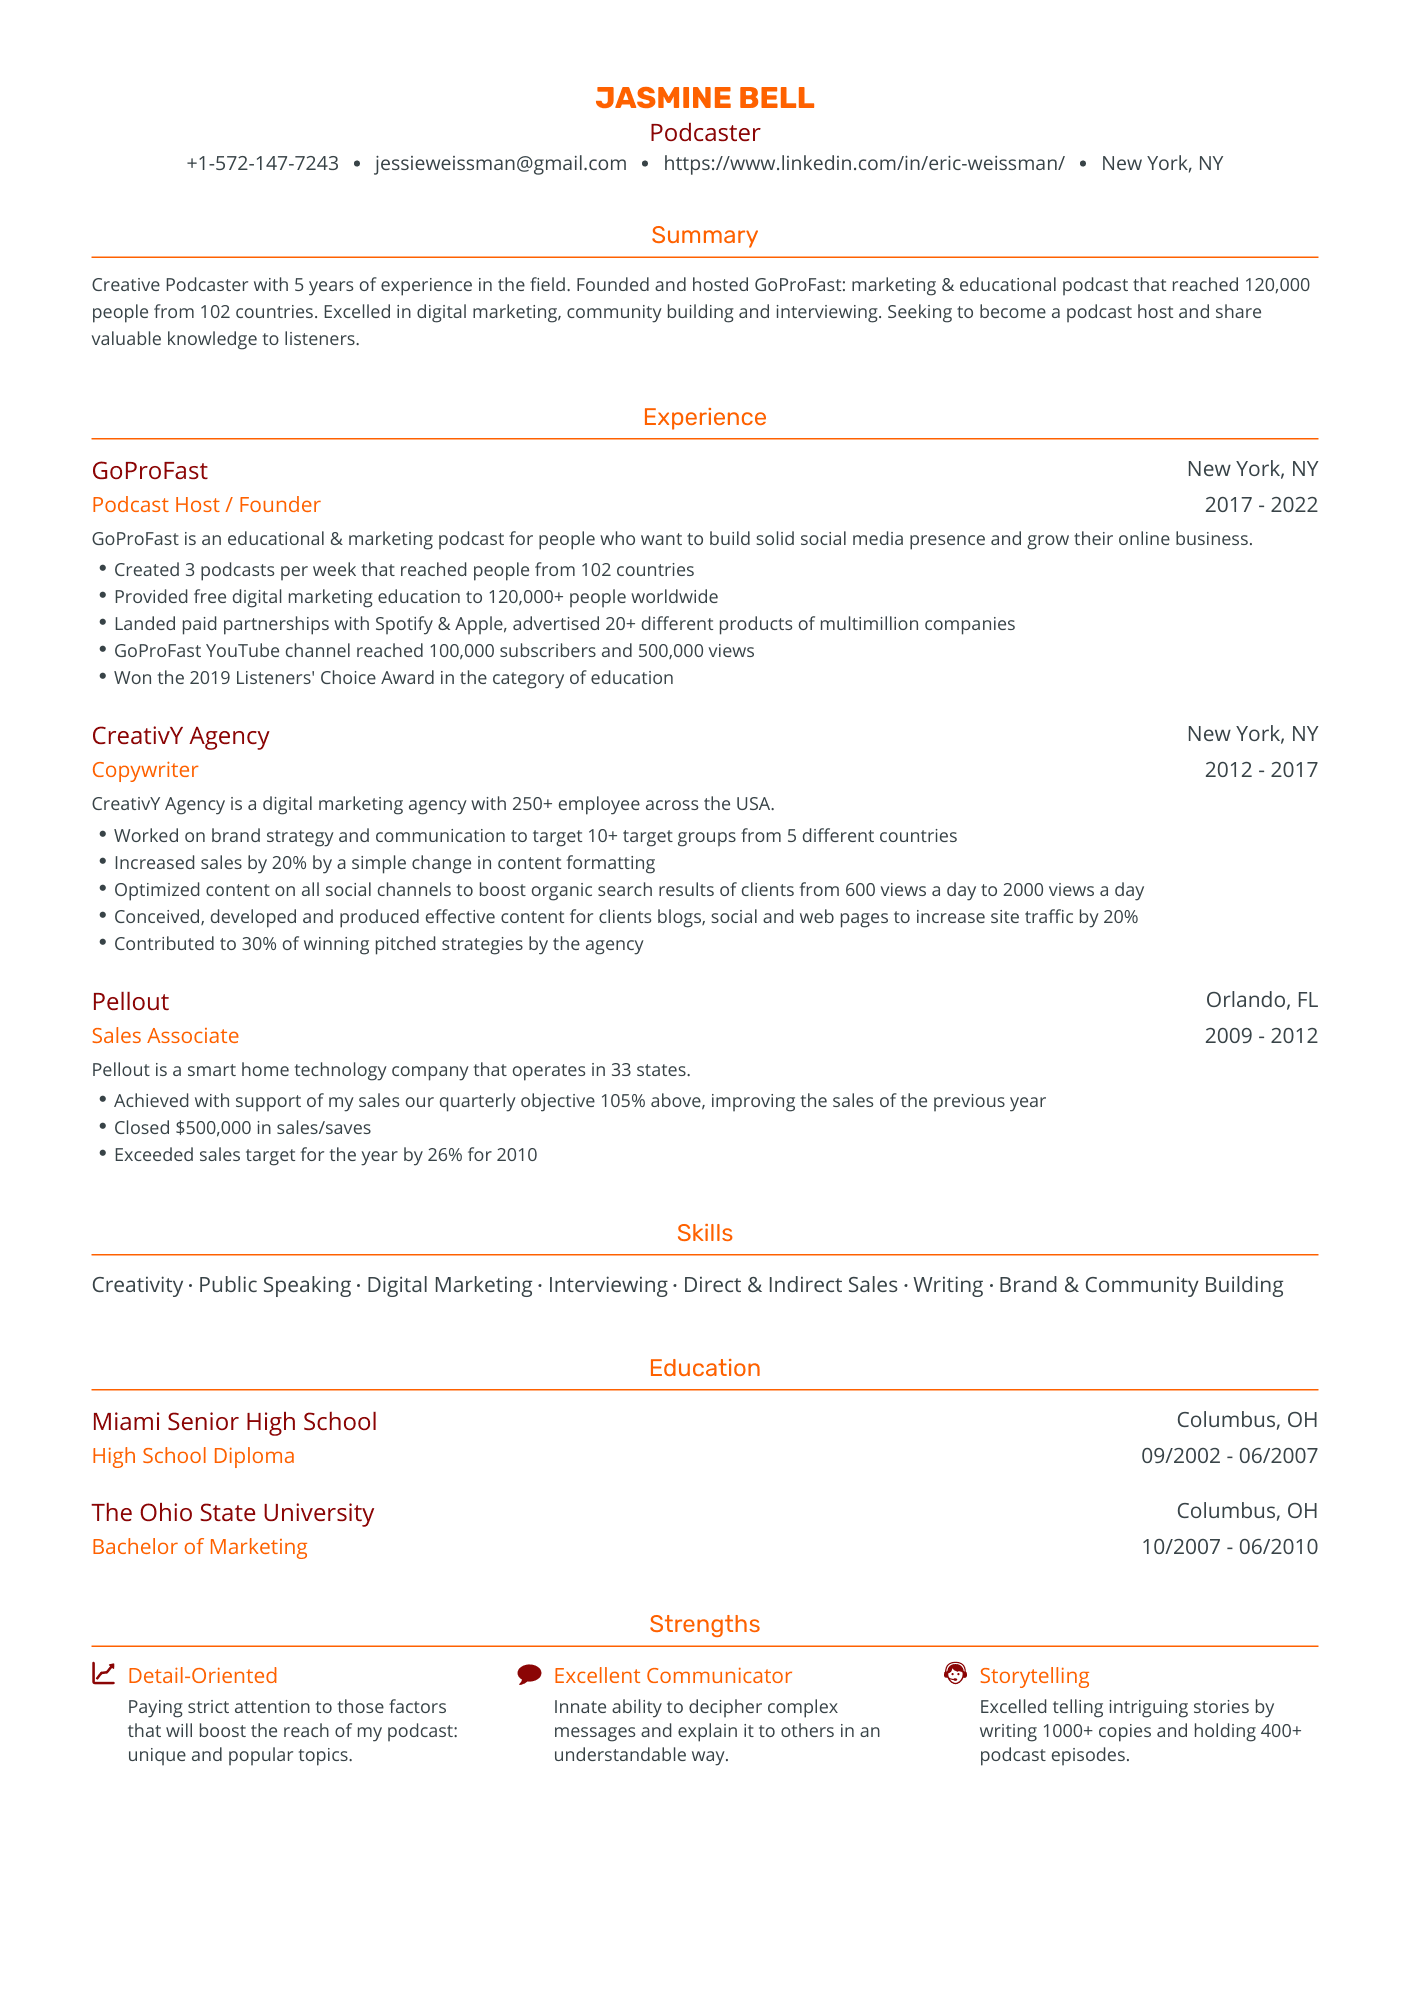 Traditional Podcaster Resume Template